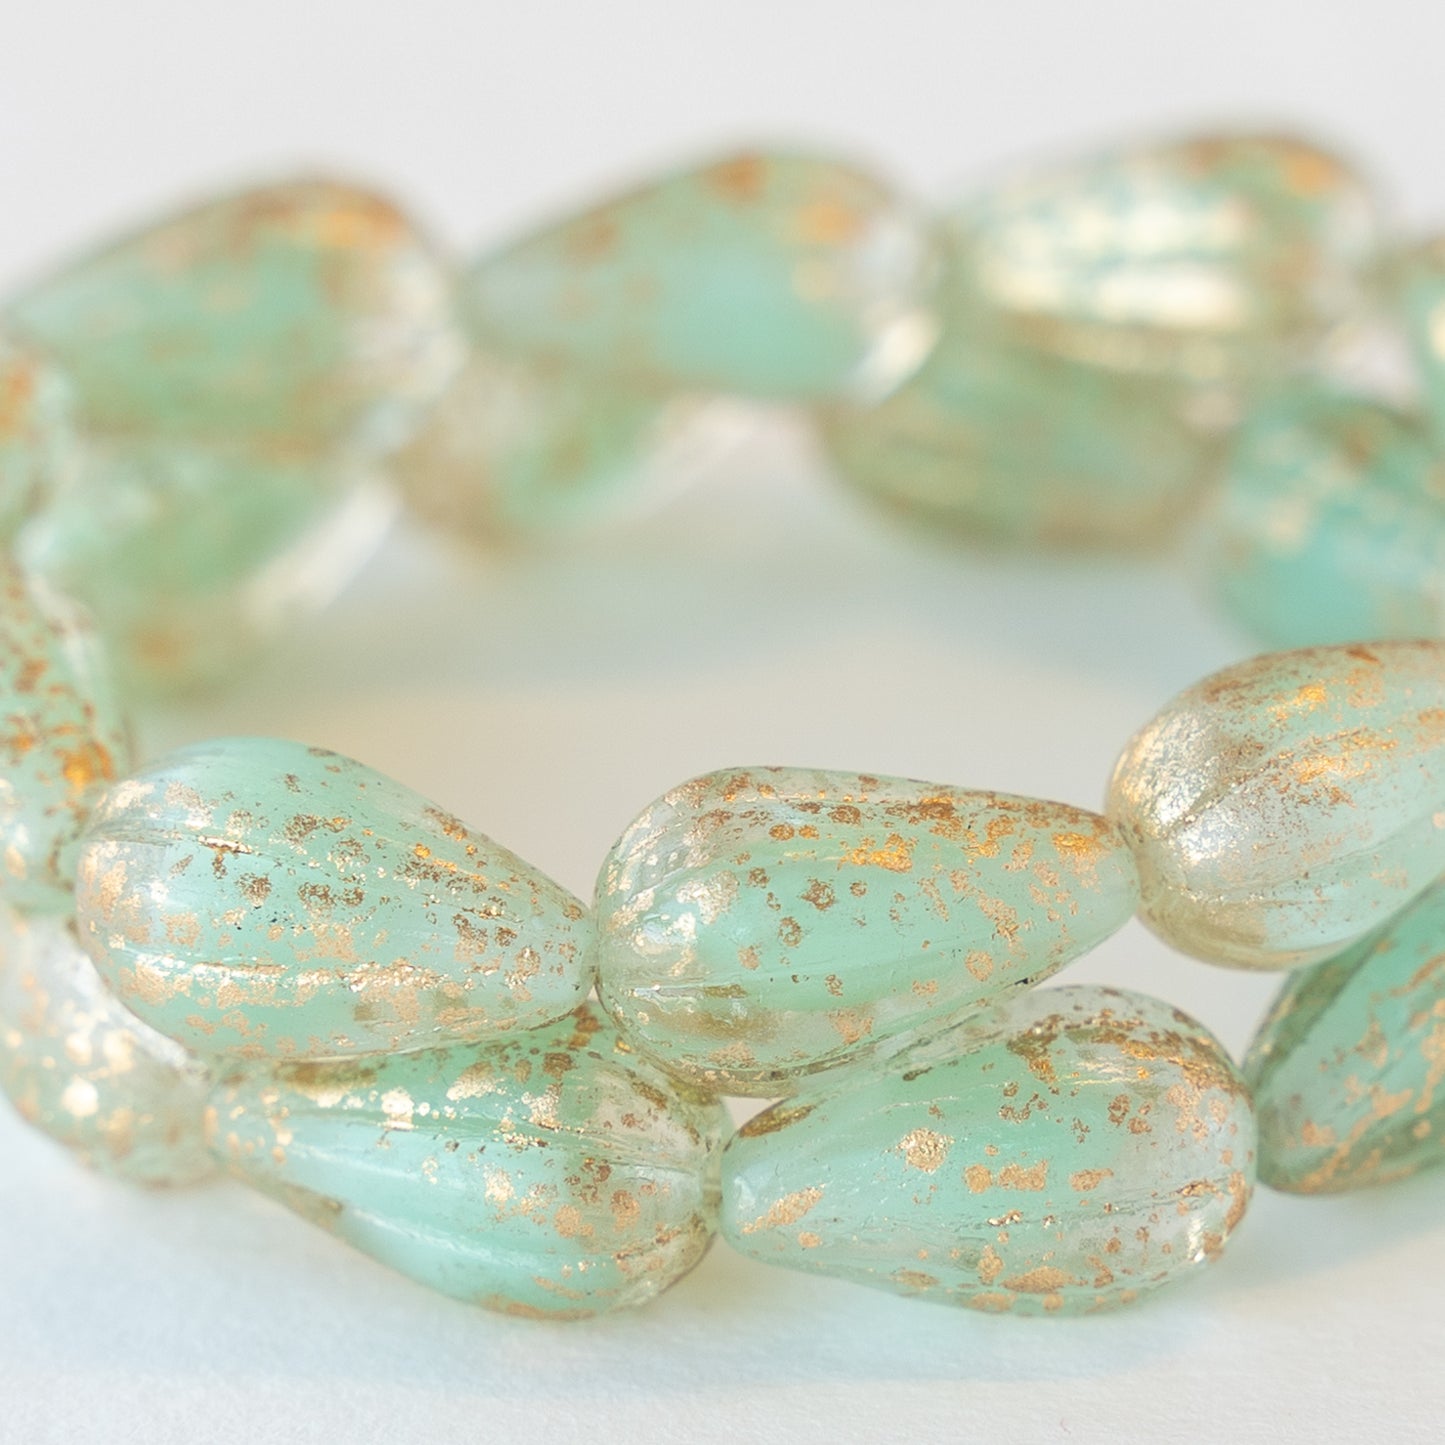 8x13mm Melon Drop - Silky Seafoam Green with Antique Gold Finish - 10 Beads